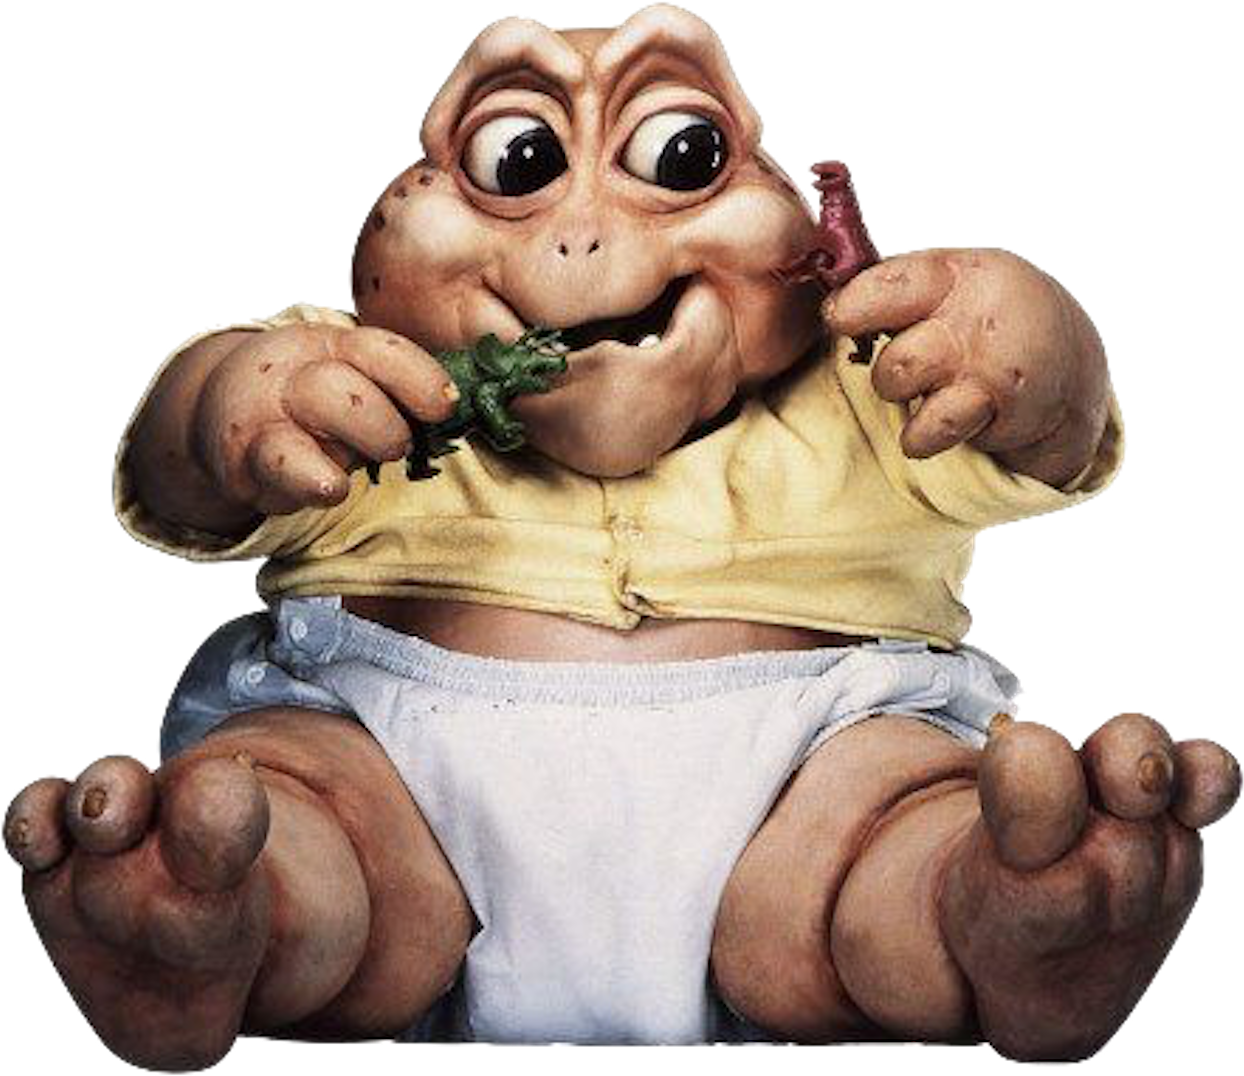 Baby Sinclair - Baby Sinclair Shirt (1263x1080), Png Download